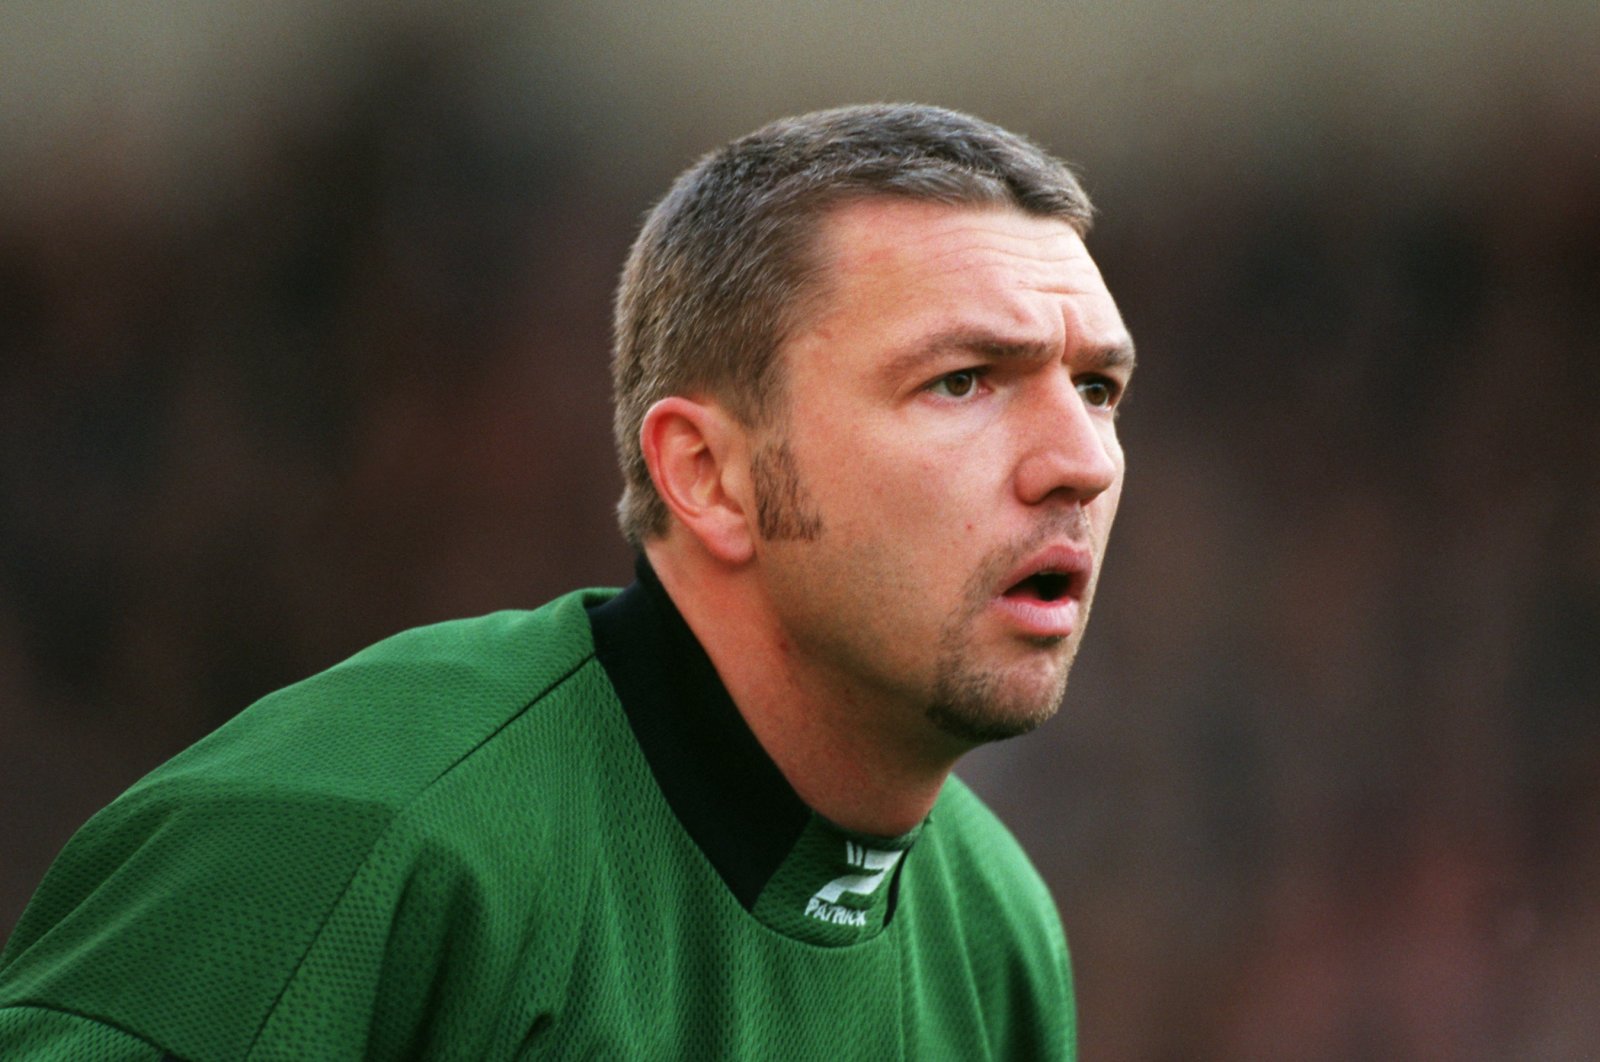 West Bromwich Albion goalkeeper Alan Miller is seen during a League One football match between West Bromwich Albion and Wolverhampton Wanderers at The Hawthorns, in West Bromwich, England, Nov. 29, 1998. (PA via Reuters)